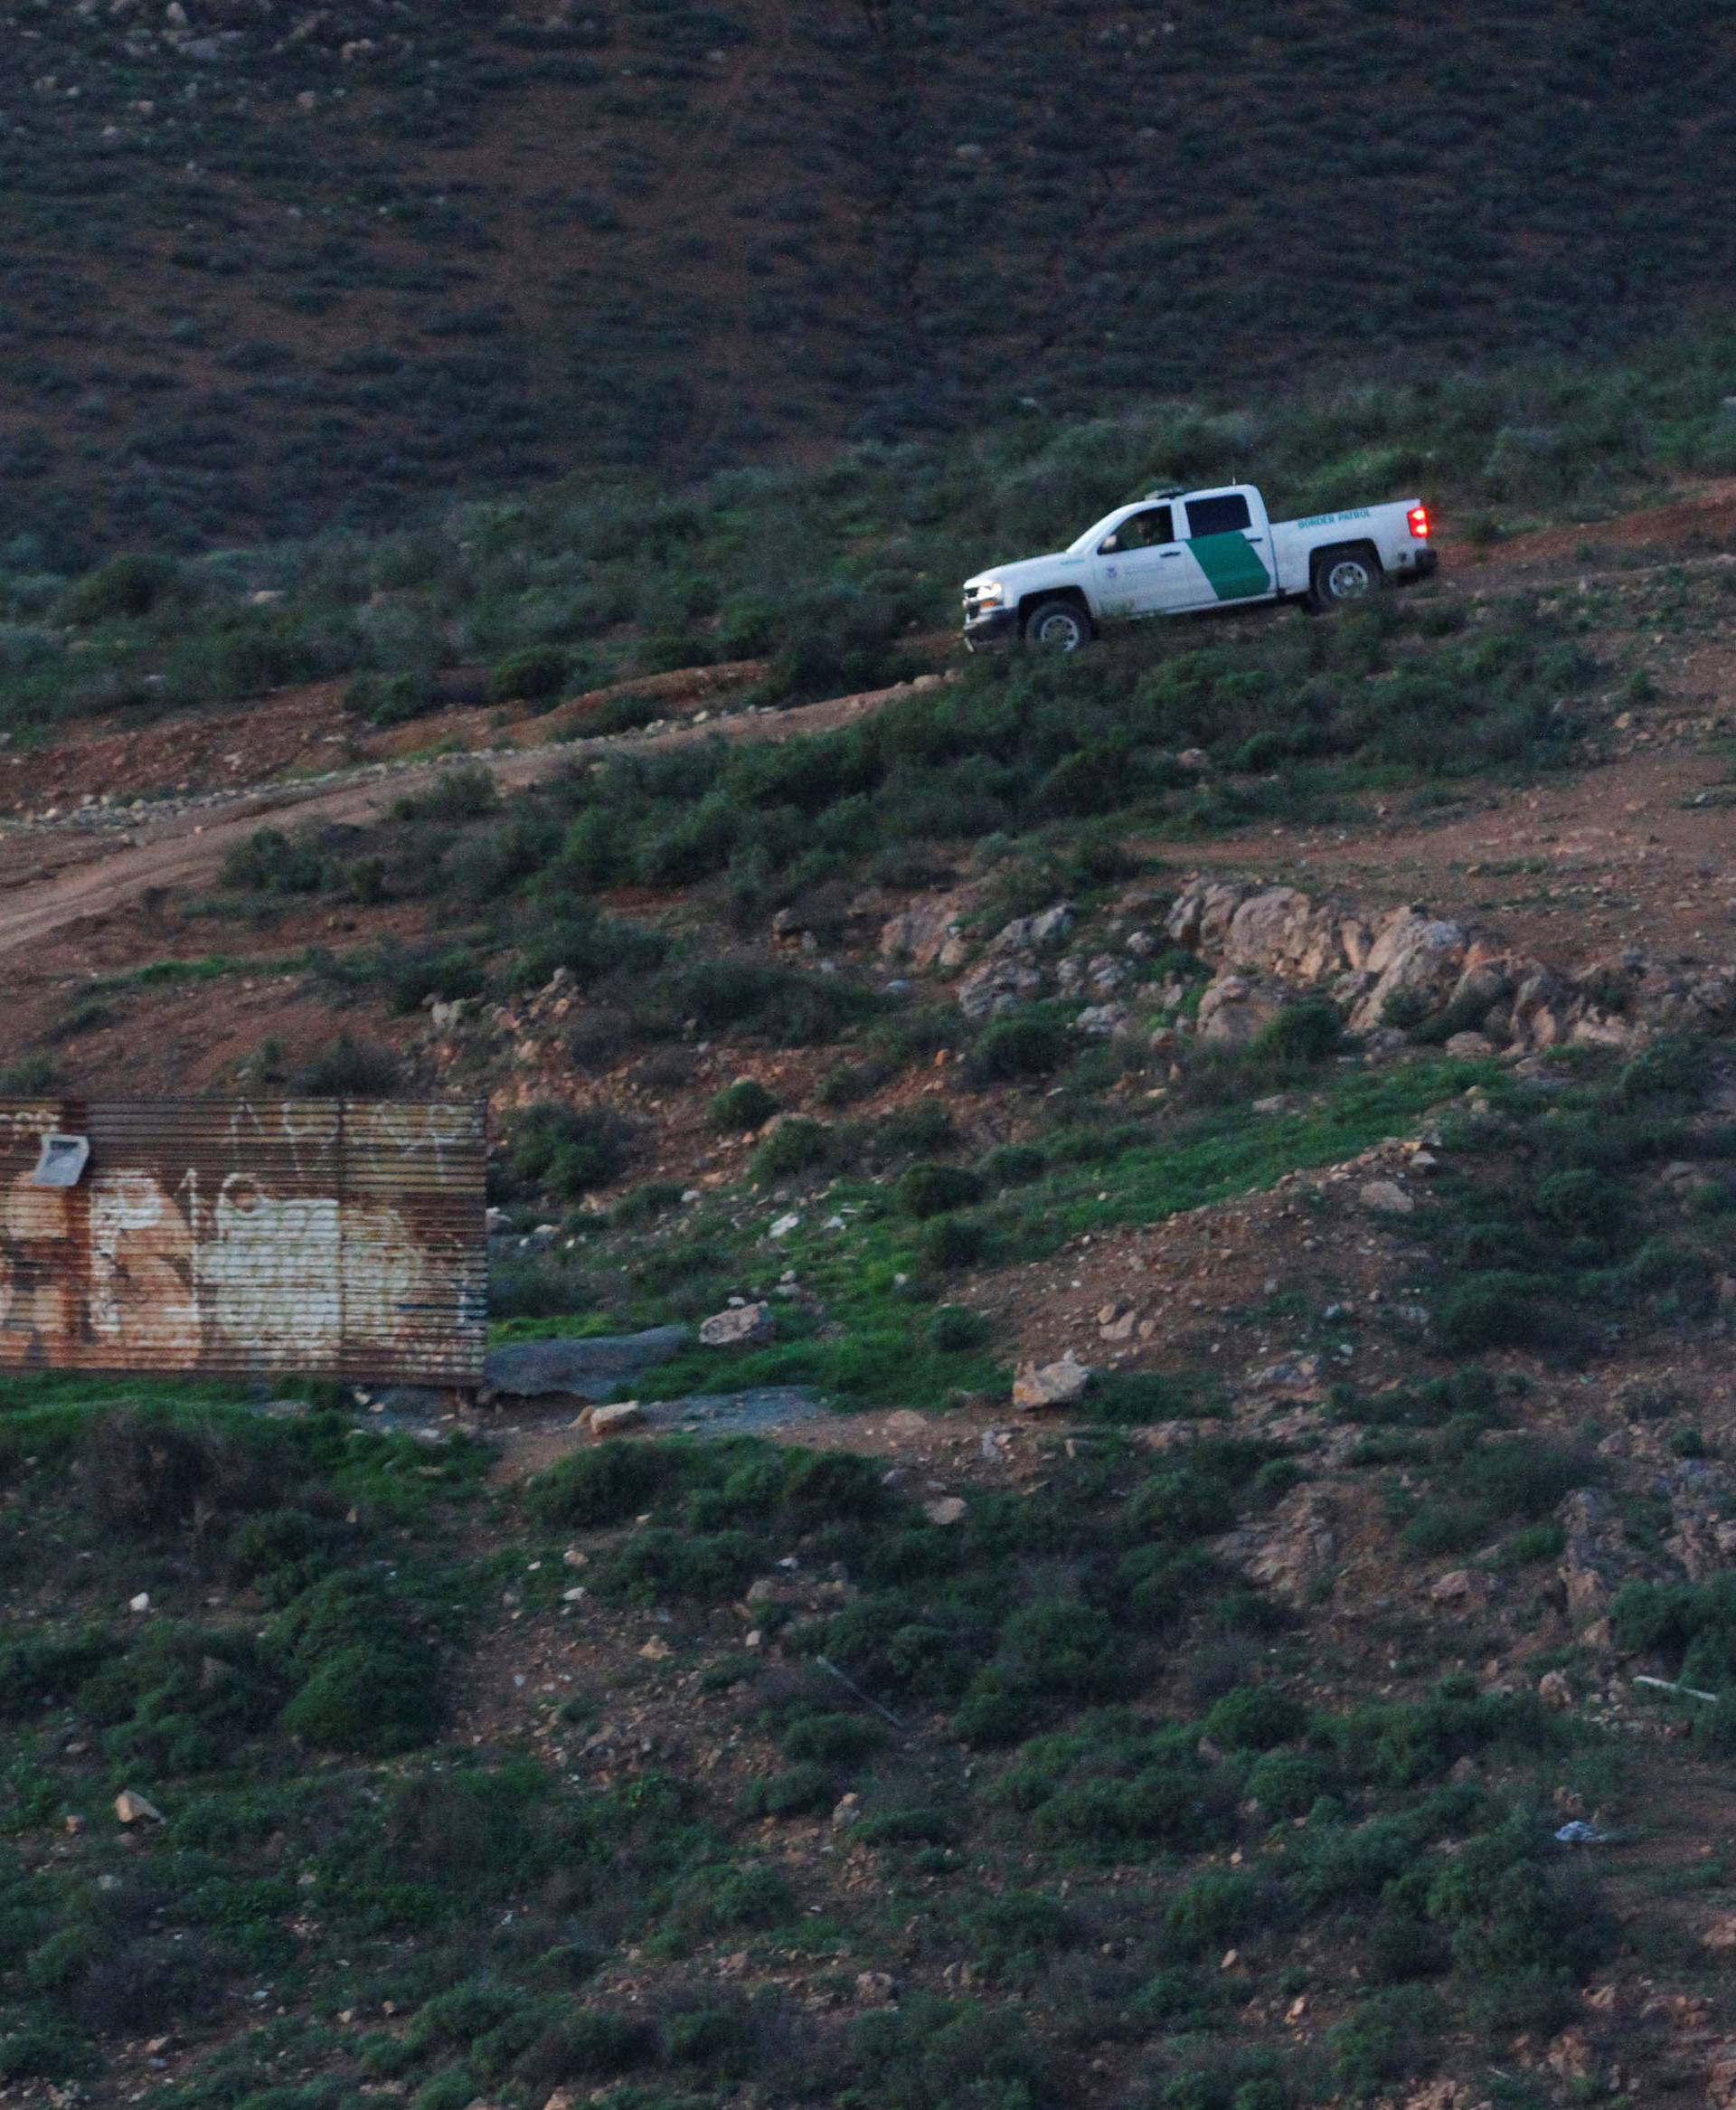 A U.S. police patrol vehicle is seen behind a section of the wall separating Mexico and the United States, in Tijuana